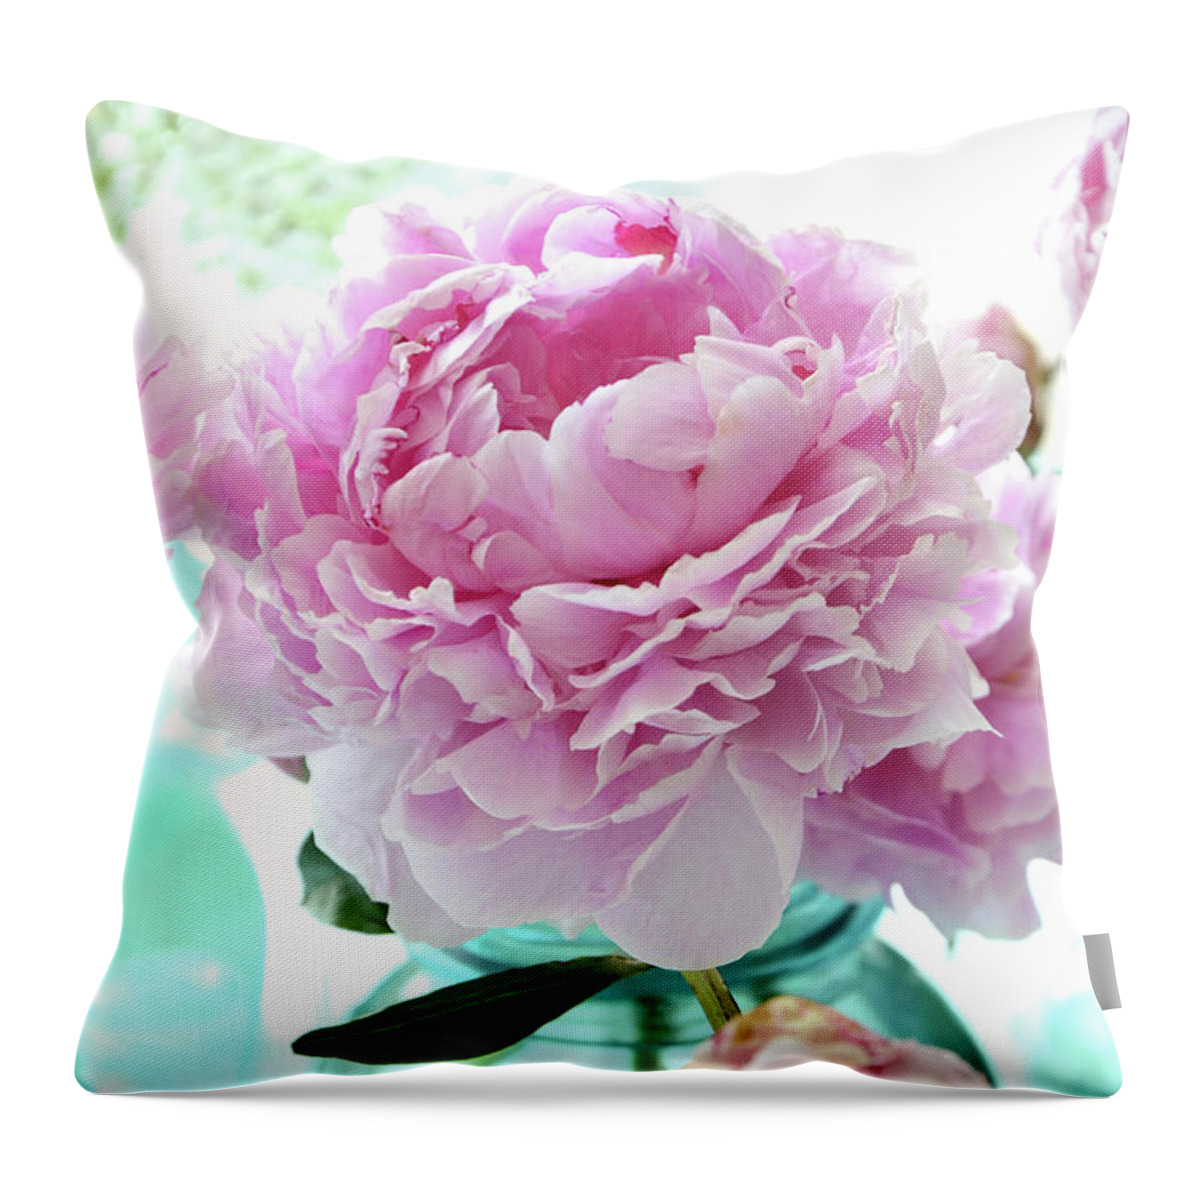 Peonies Throw Pillow featuring the photograph Shabby Chic Romantic Pink Peonies Aqua Mason Ball Jars - Cottage Summer Garden Peonies Decor by Kathy Fornal